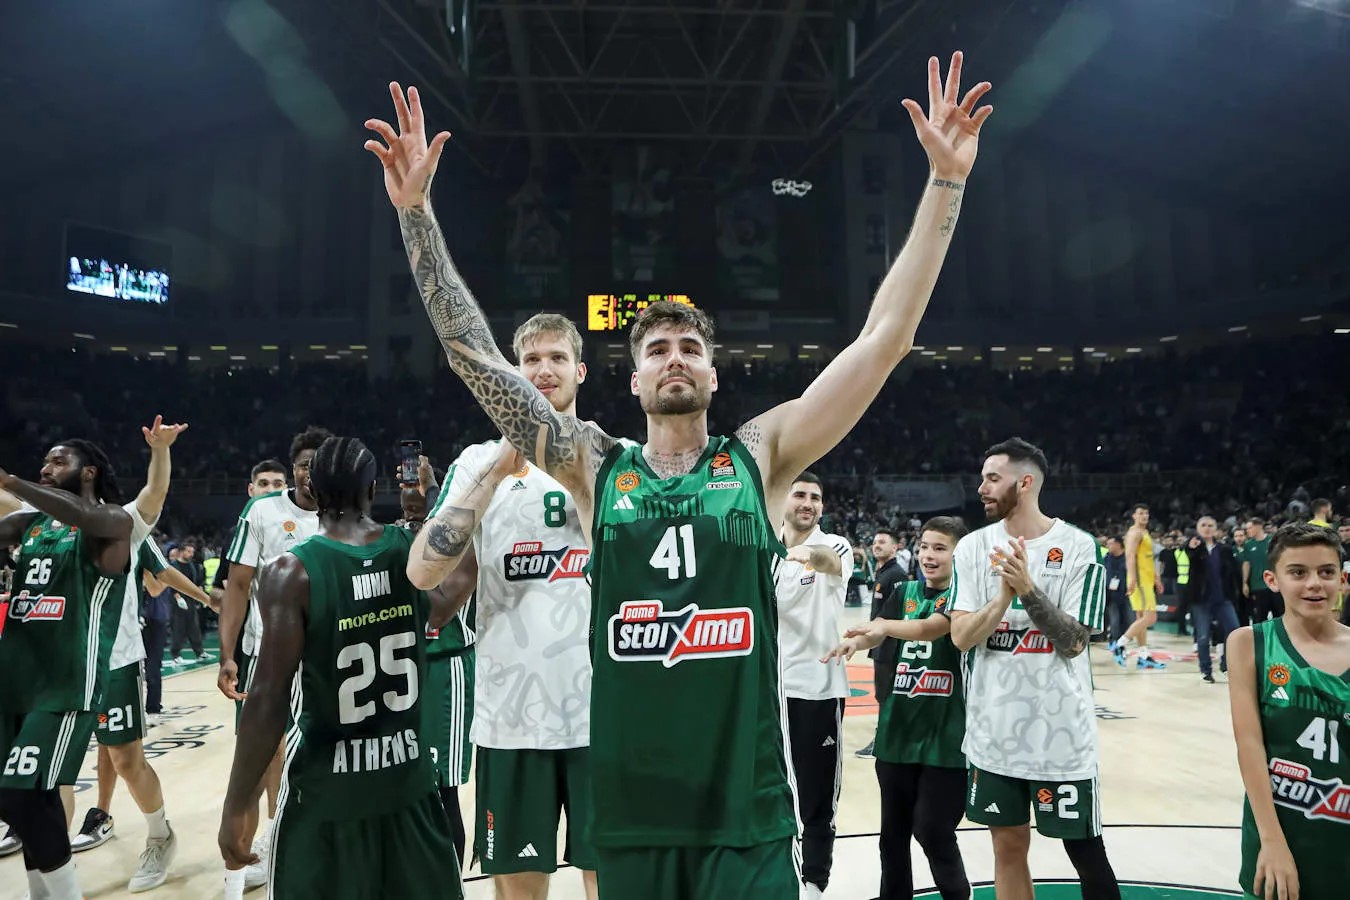 There is belief and expectation among Panathinaikos fans and players under the Ergin Ataman revolution